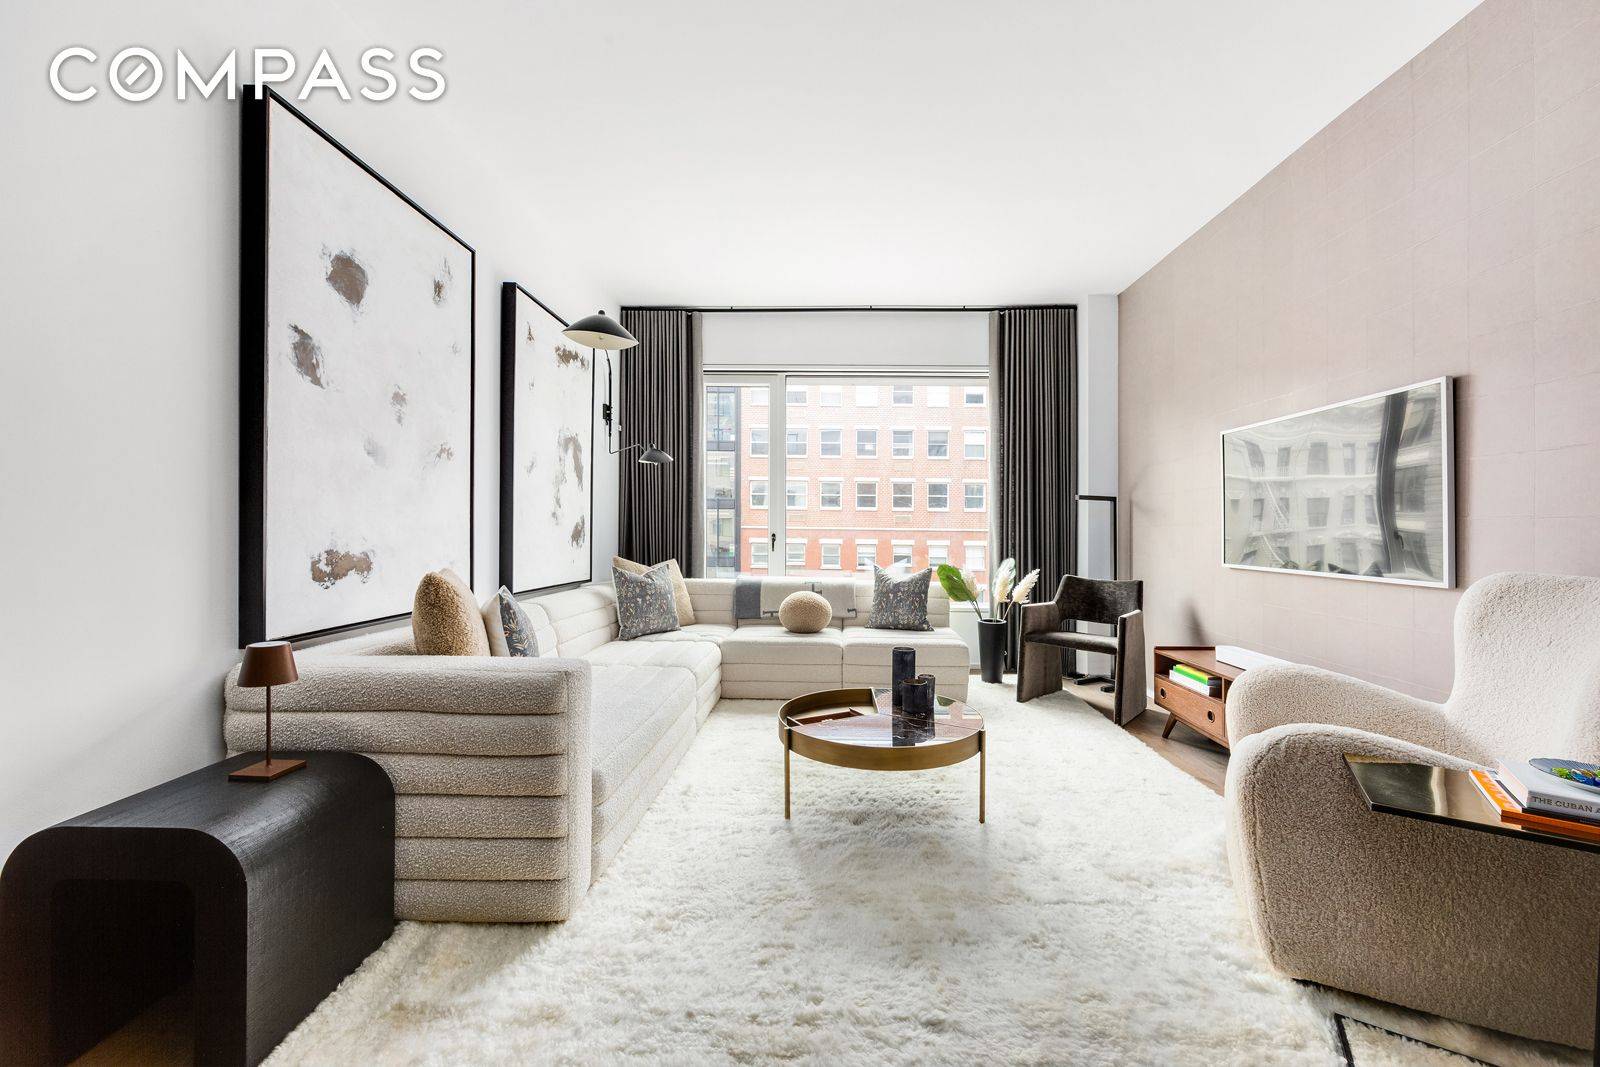 Apartment 5A is a perfectly proportioned two bedroom, two bathroom lofty residence with sunny southern exposures and iconic views of the Meatpacking District s Gansevoort Square.